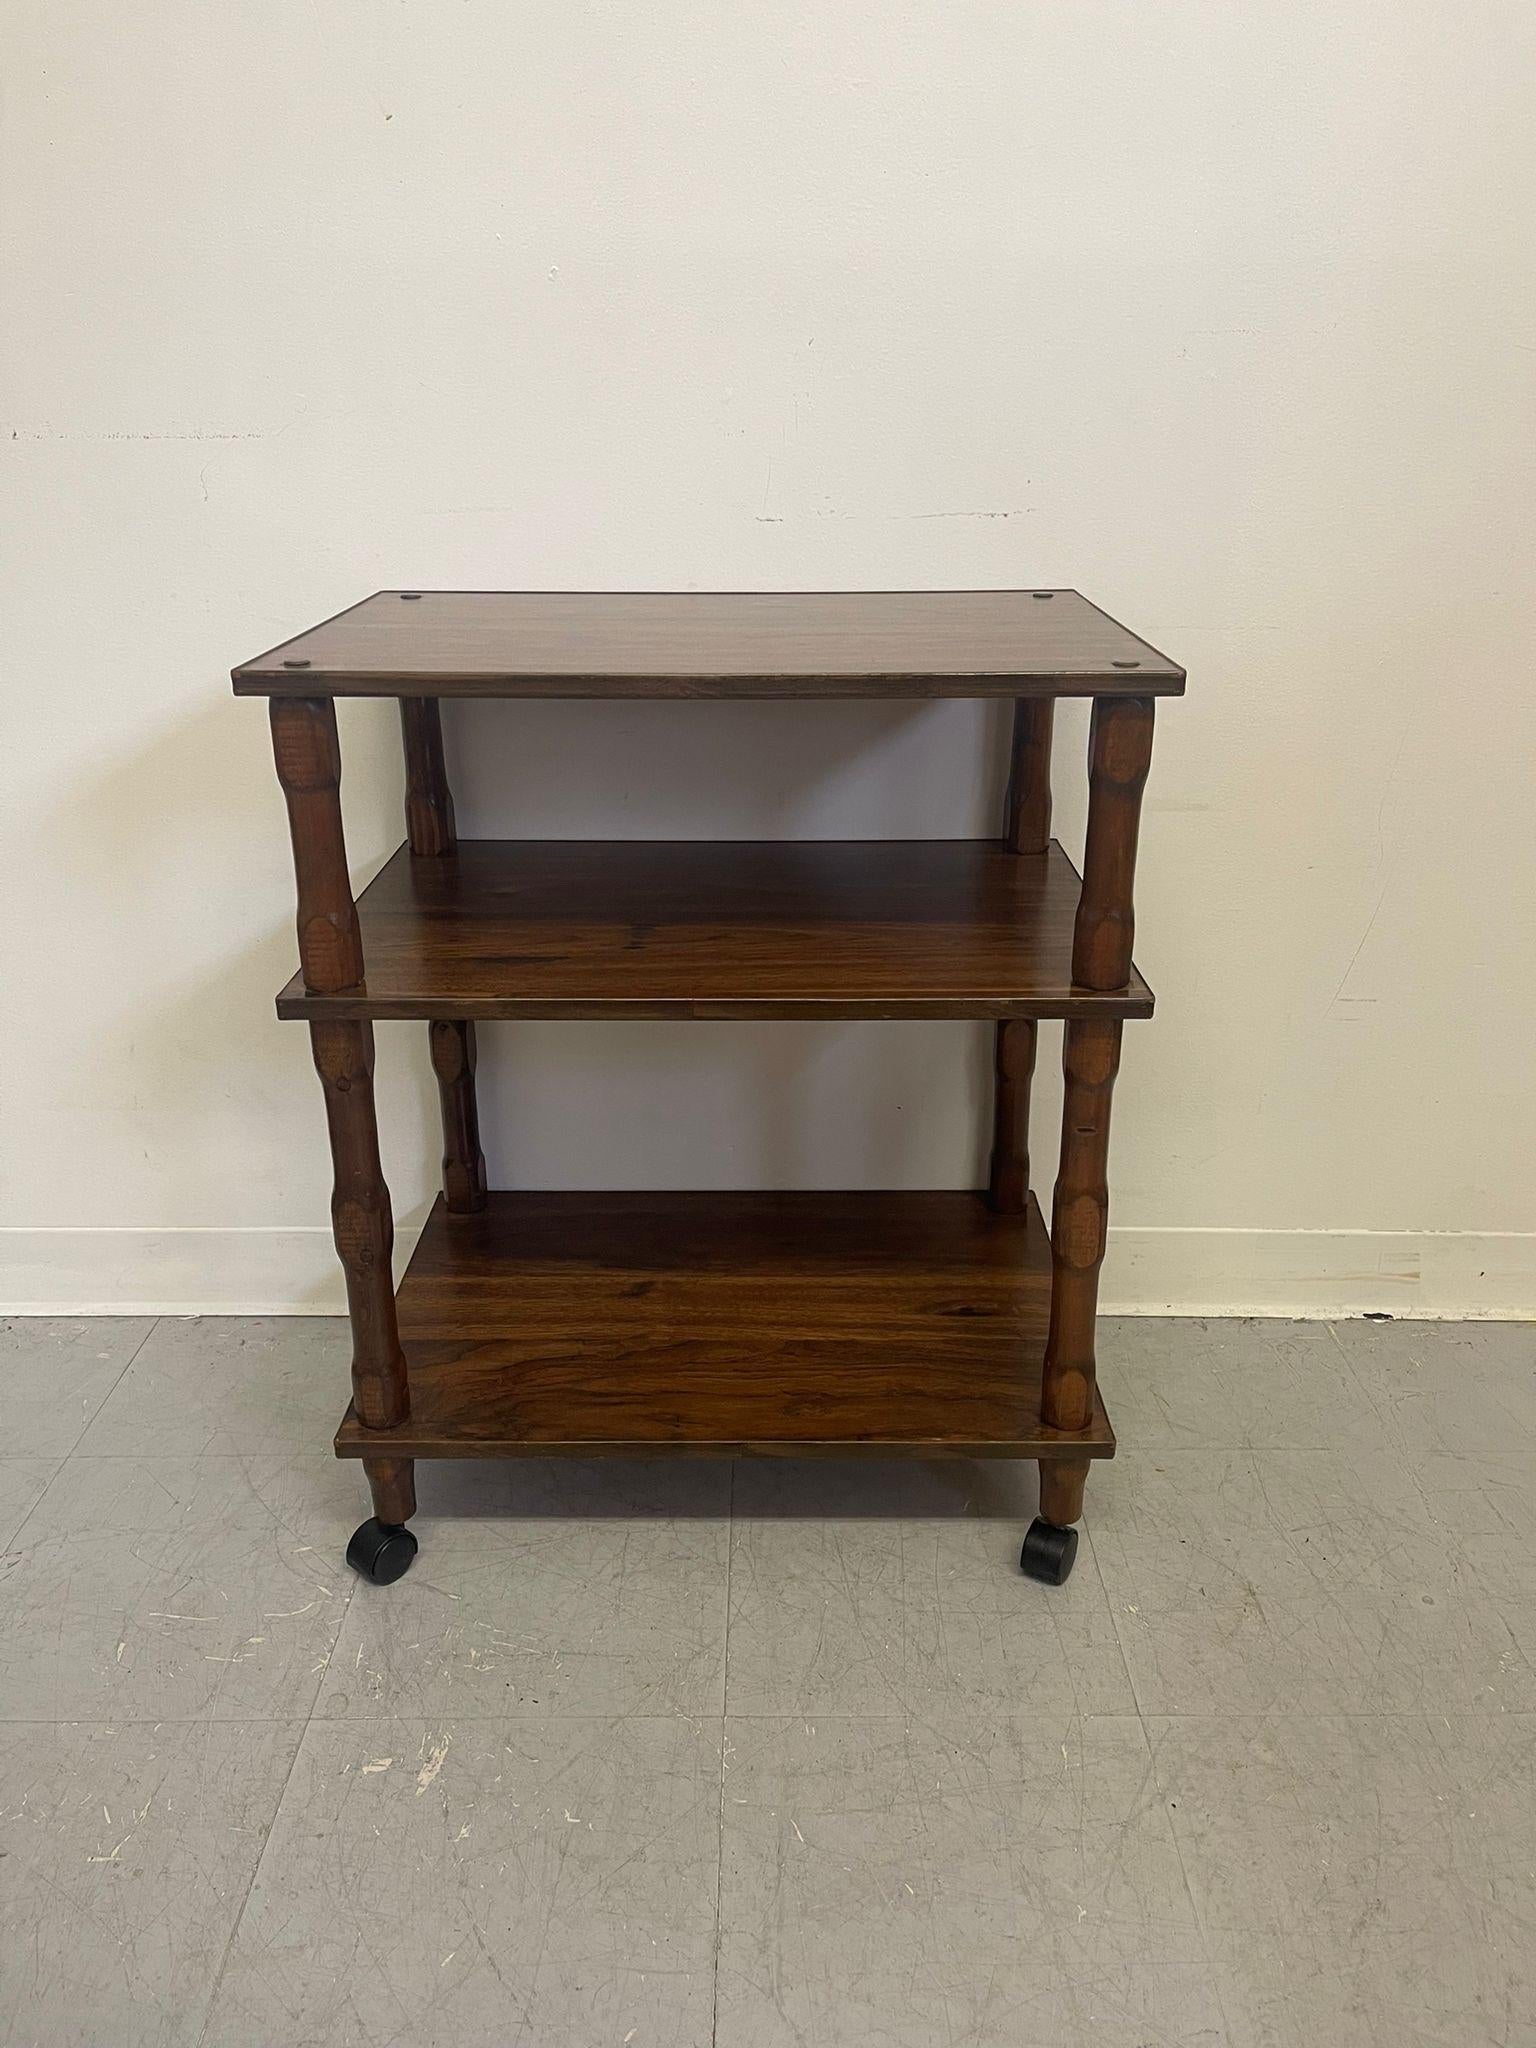 This Bookshelf has three levels connected by turned wood legs. On casters. Vintage Condition Consistent with Age as Pictured.

Dimensions. 24 W ; 16 D ; 29 H